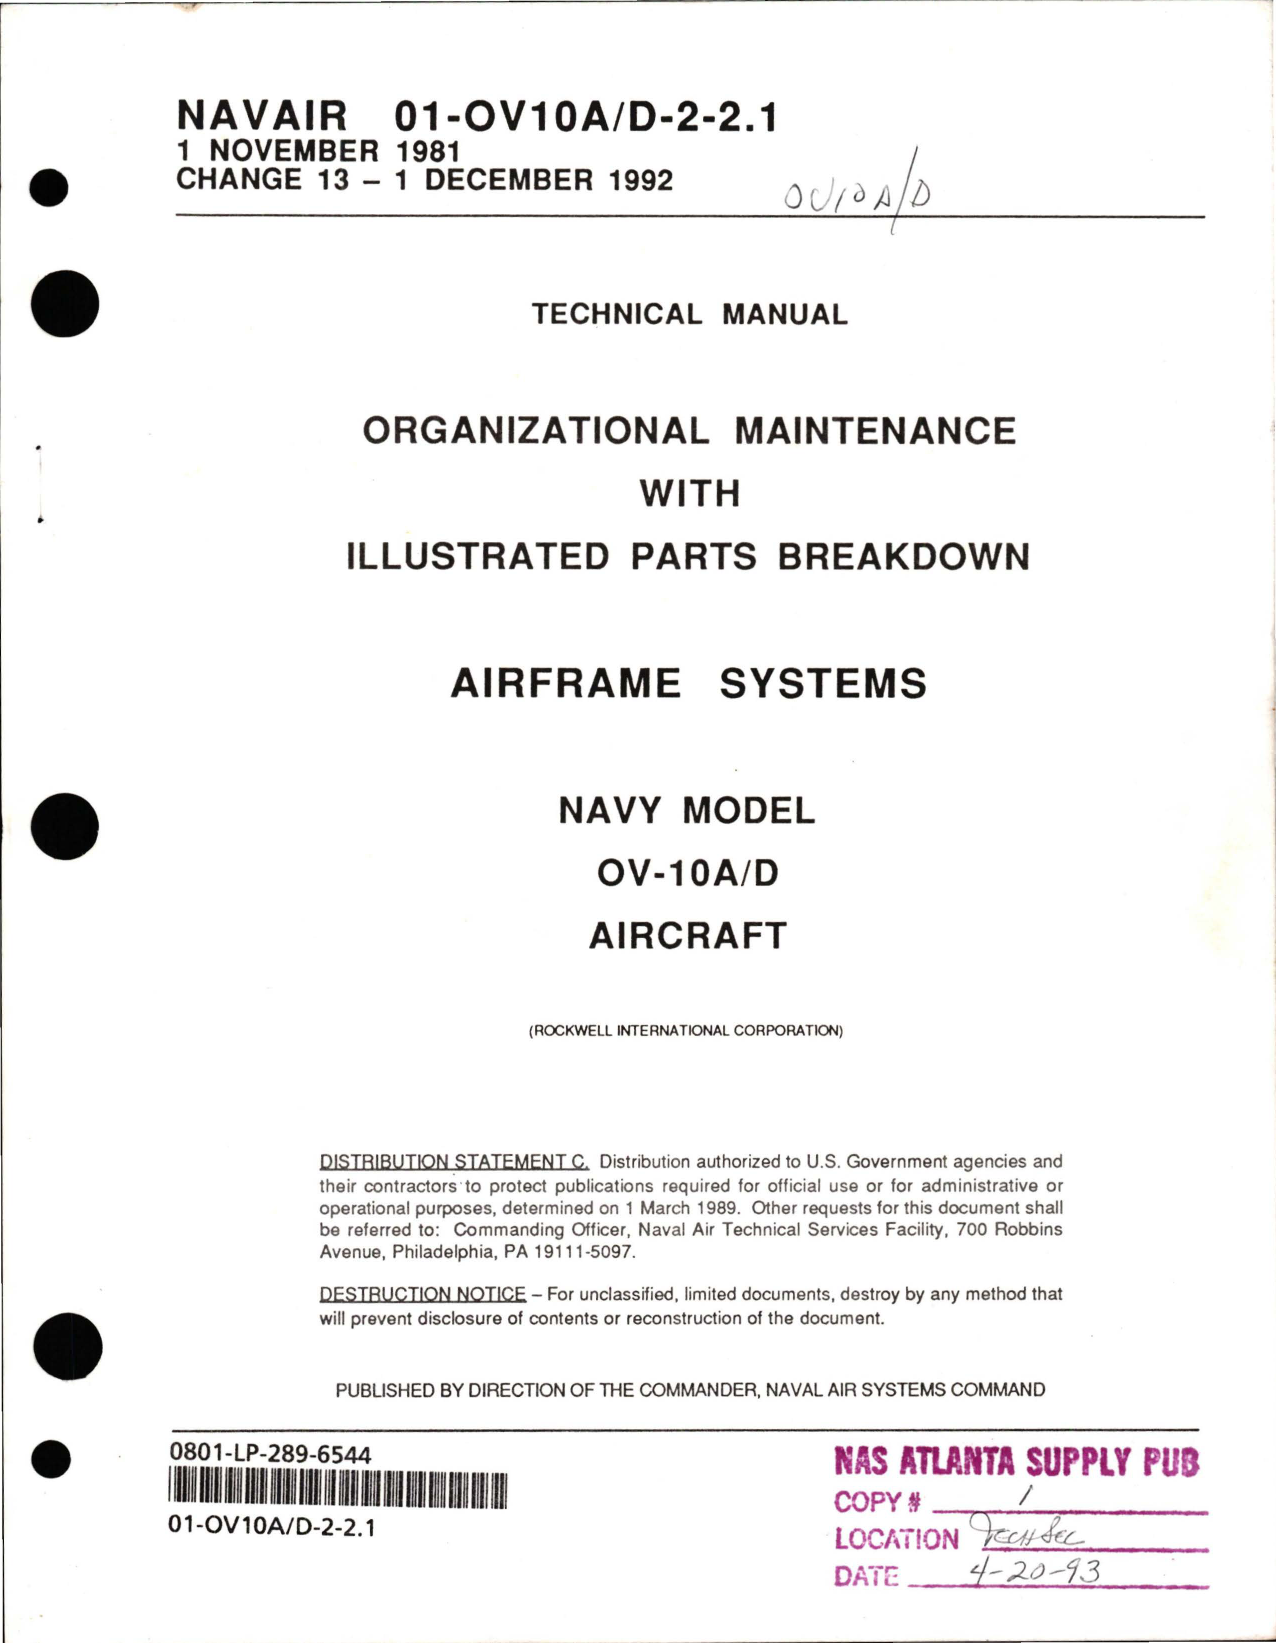 Sample page 1 from AirCorps Library document: Organizational Maintenance with Illustrated Parts Breakdown for Airframe Systems on OV-10A/D